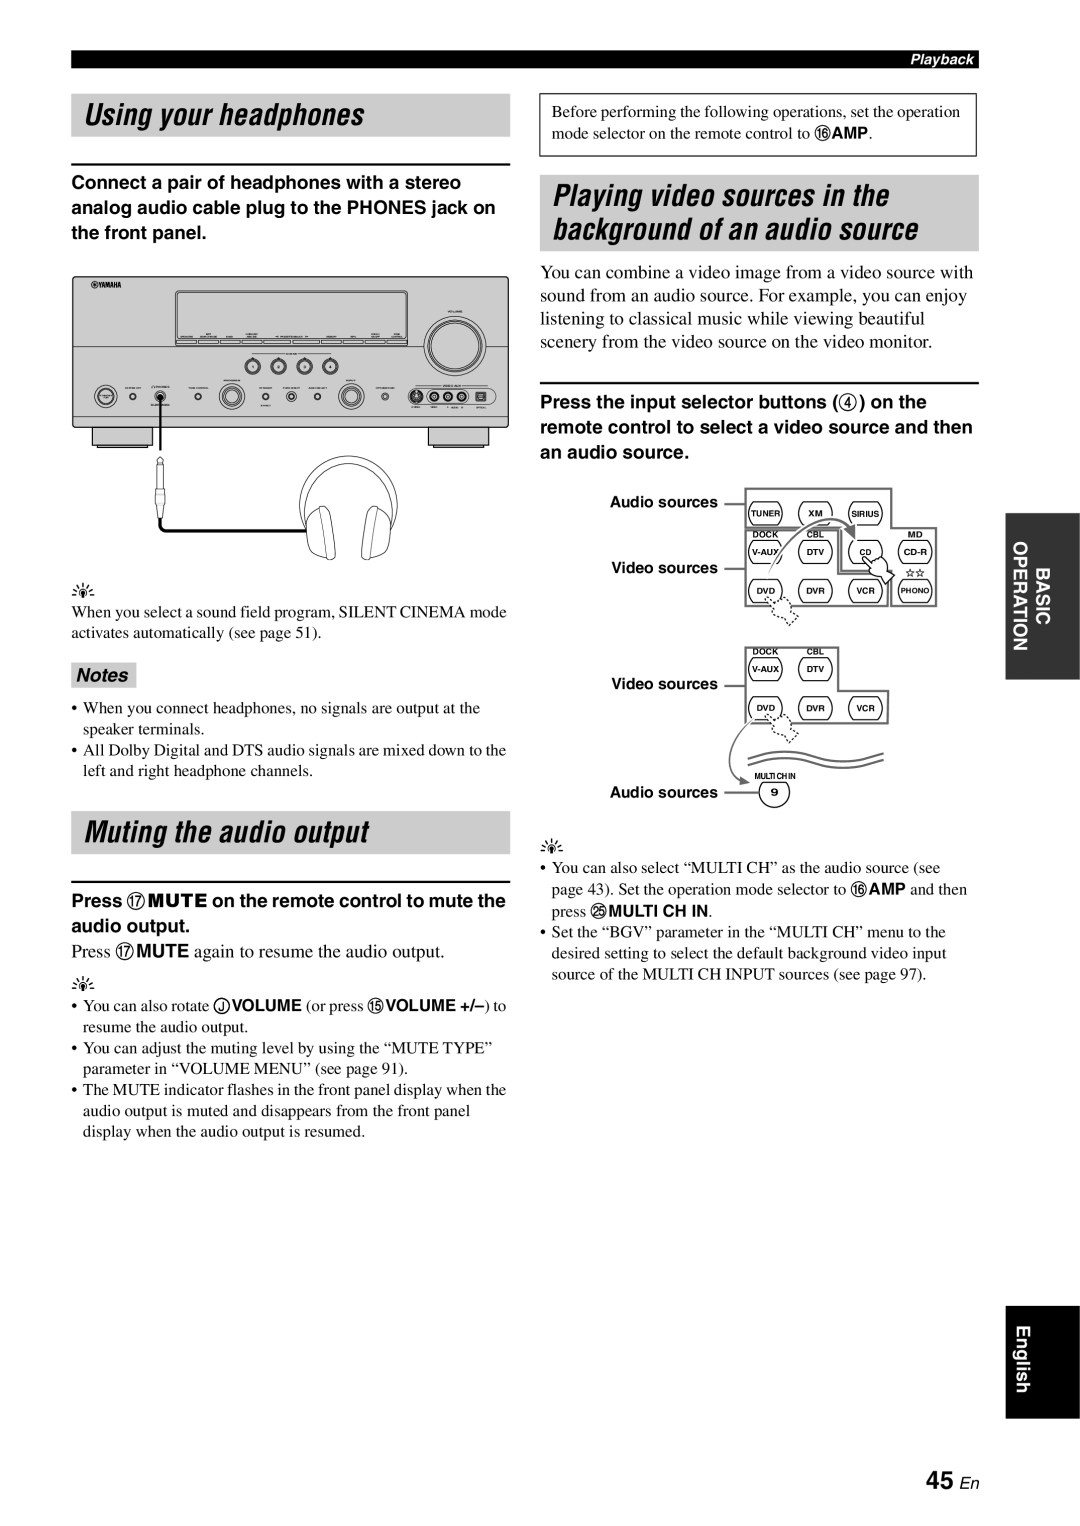 Yamaha RX-V863 owner manual Using your headphones, Muting the audio output, 45 En, Notes 